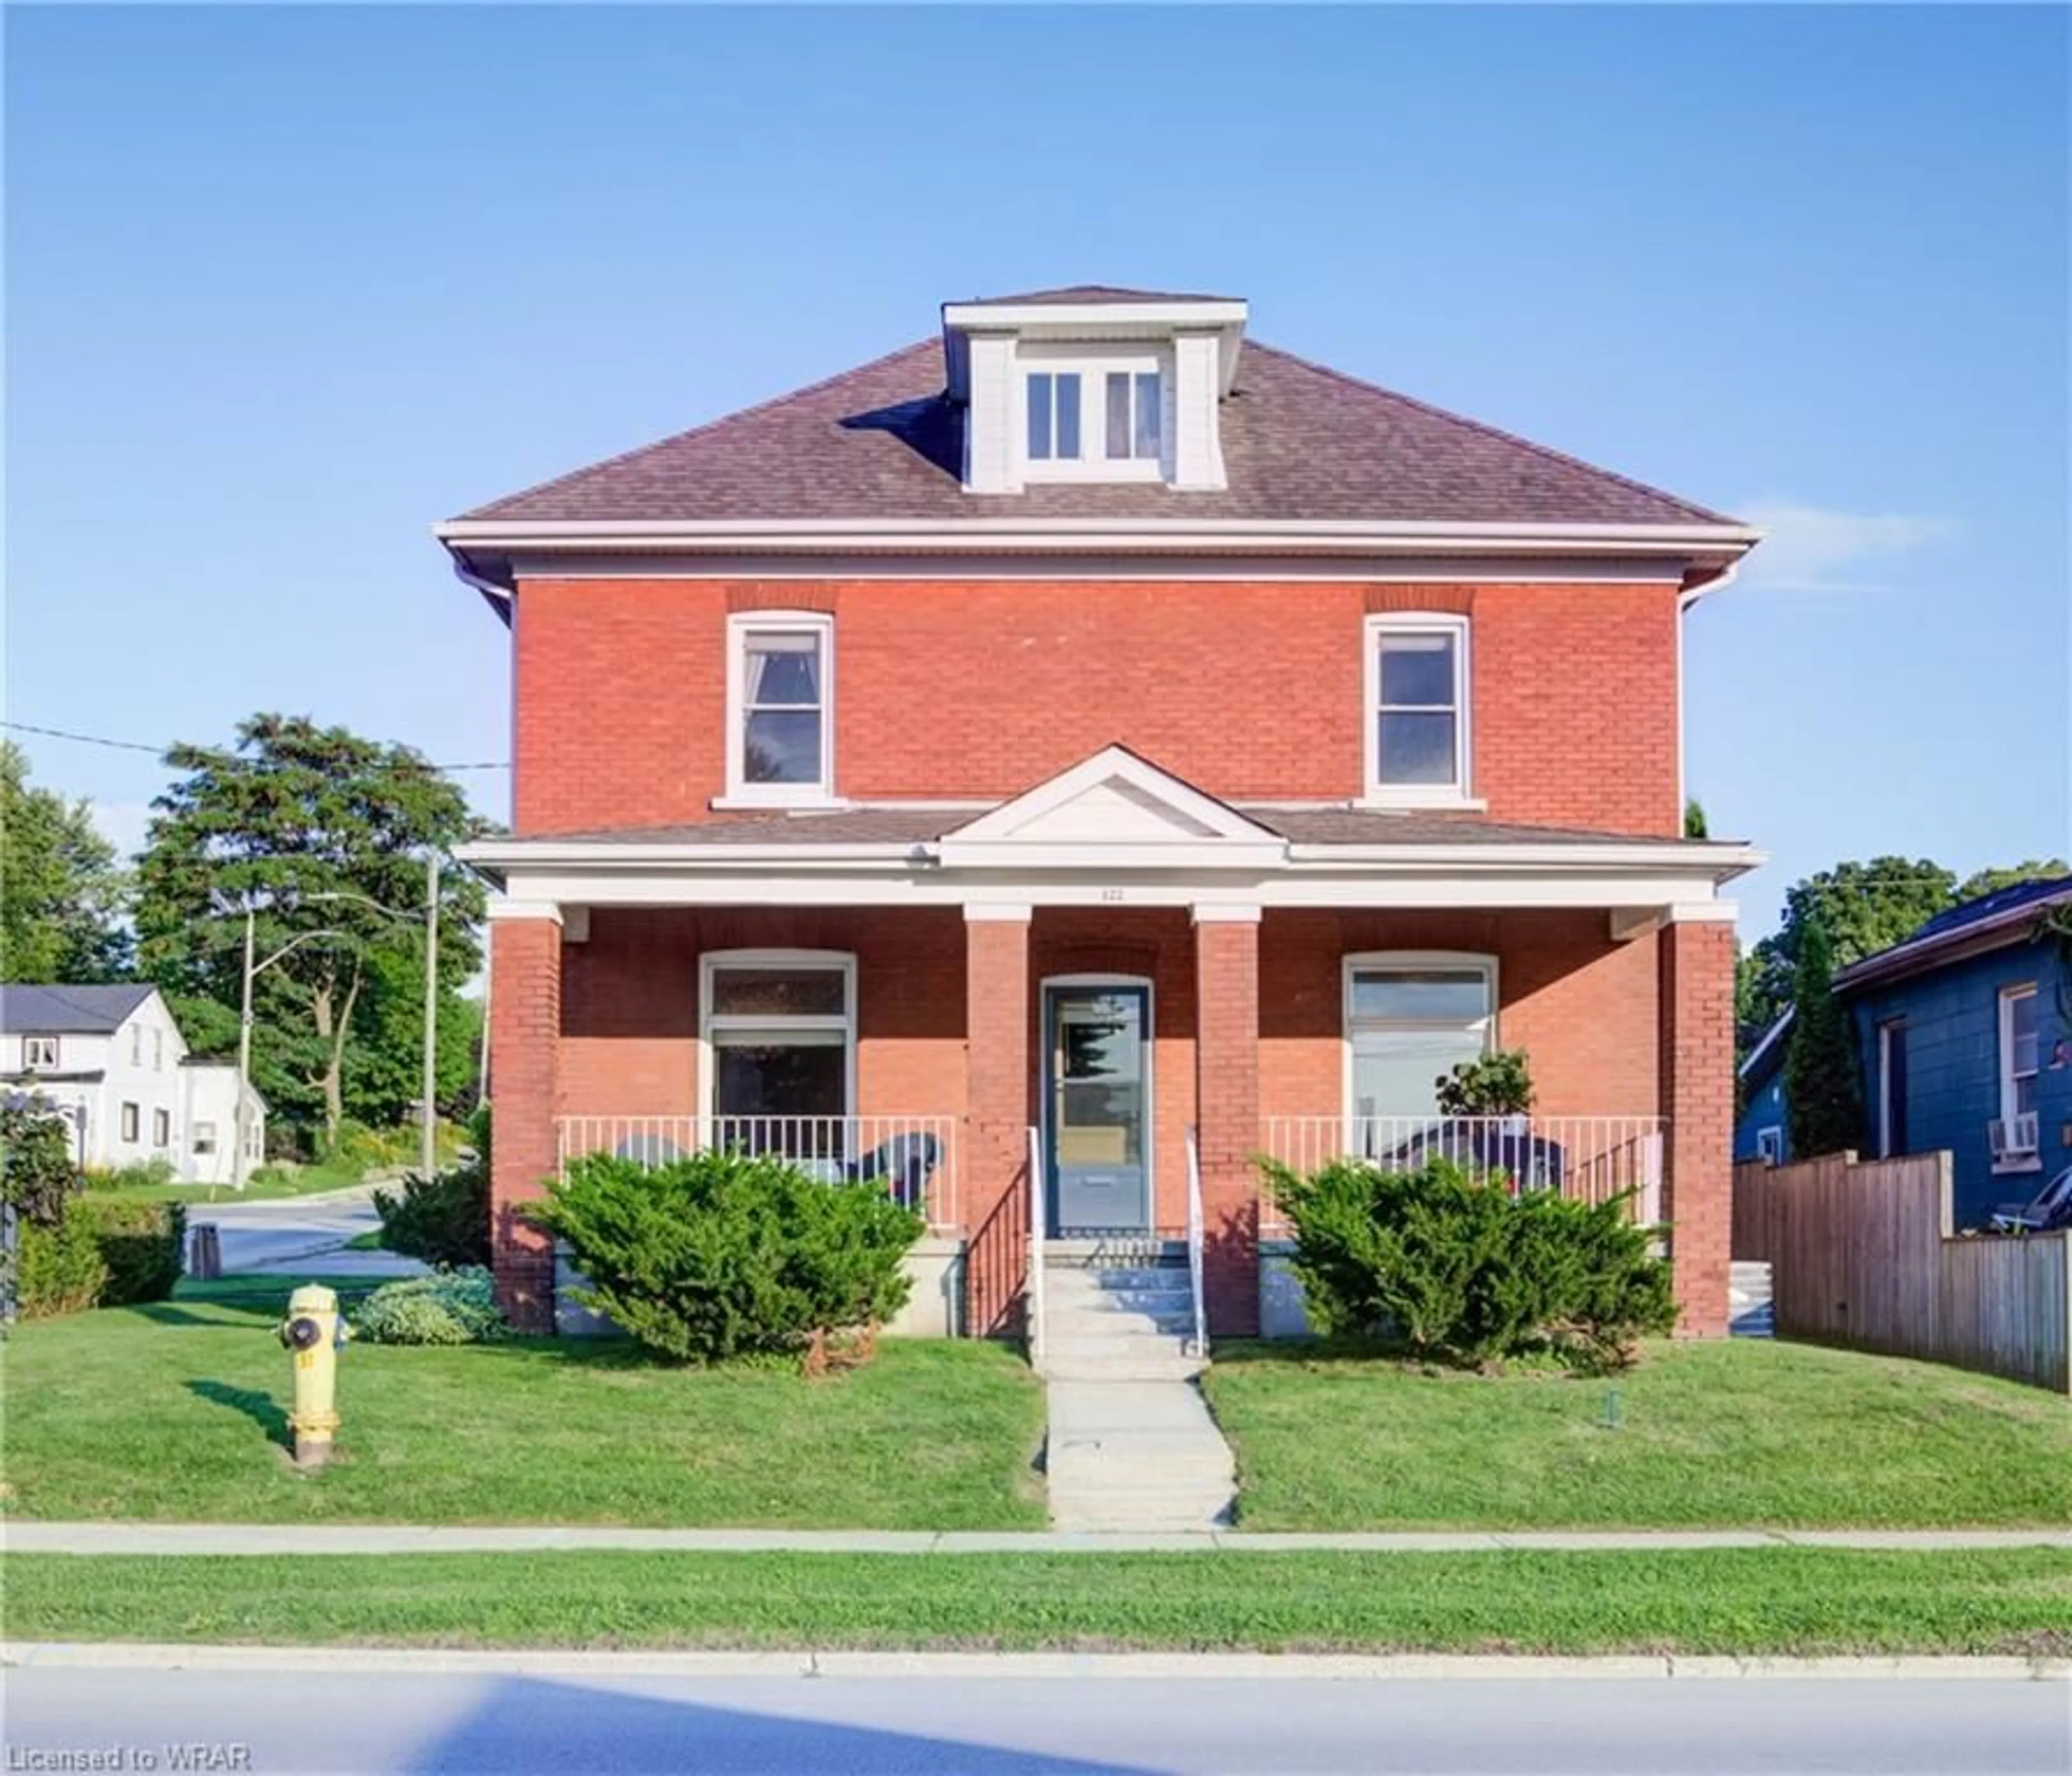 Home with brick exterior material for 122 Charles St, Ingersoll Ontario N5C 1J8